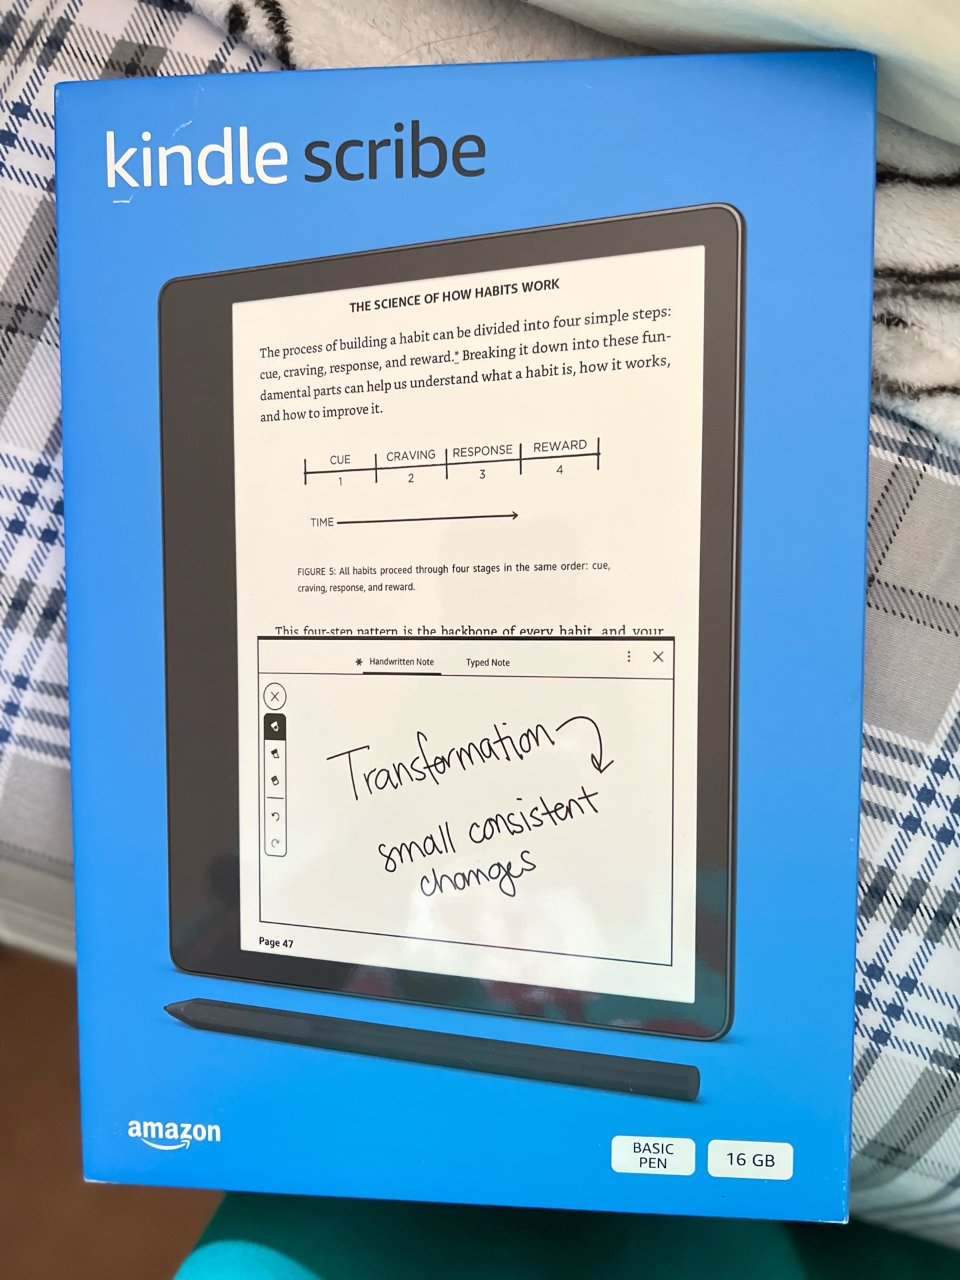 Kindle Scrible 初体验...